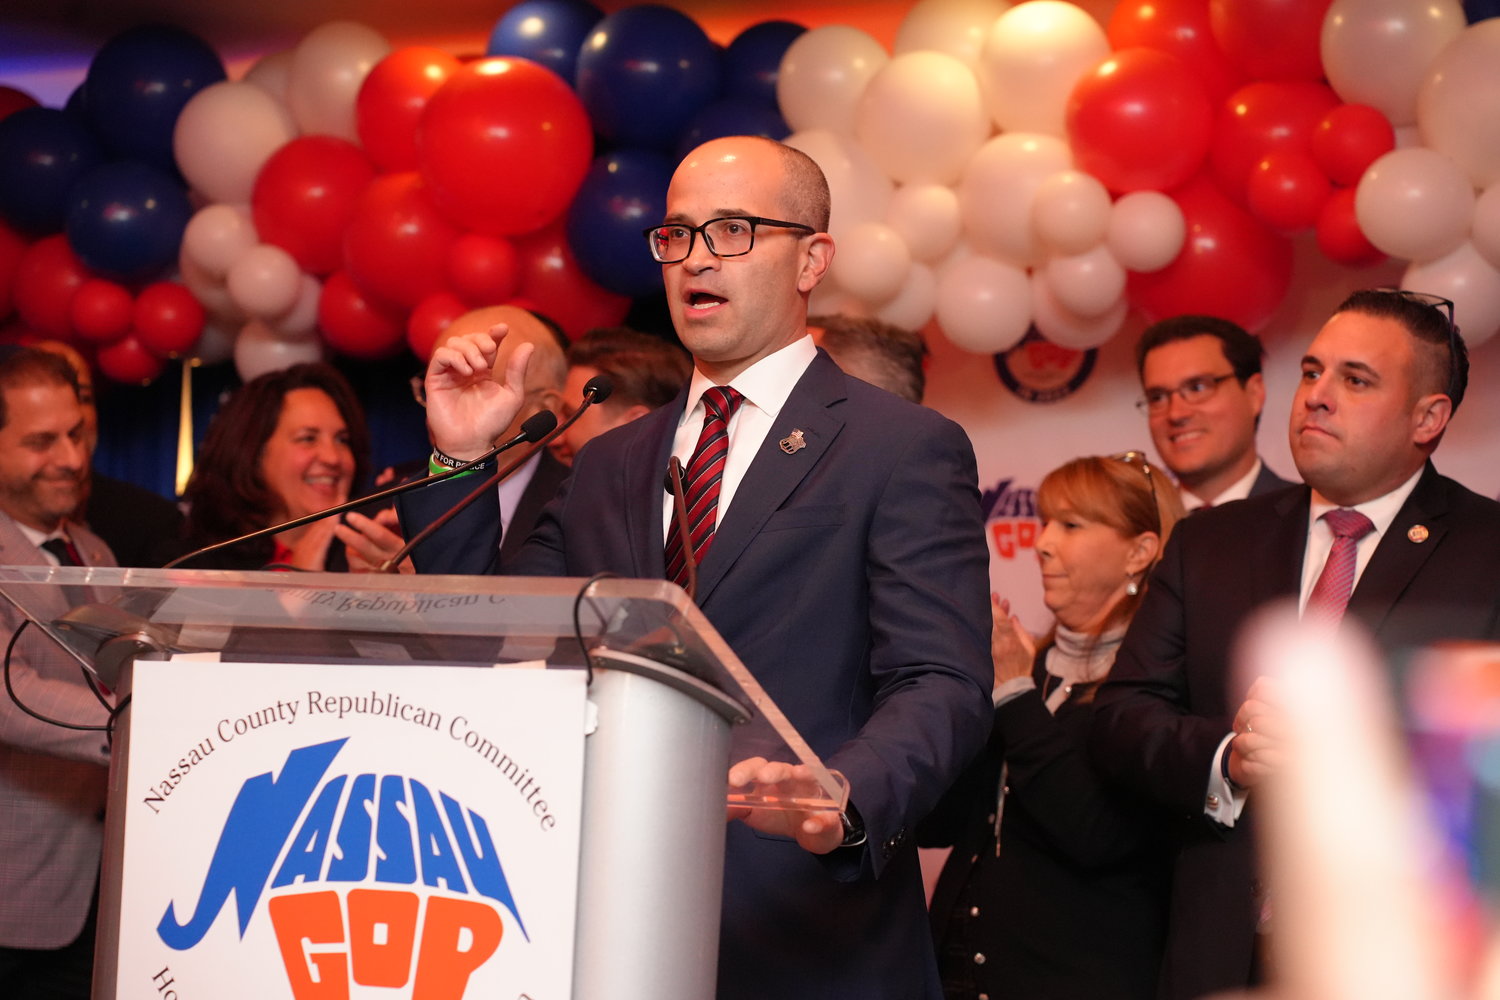 Ed Ra was among the Republicans declaring victory, winning re-election to his state assembly seat.